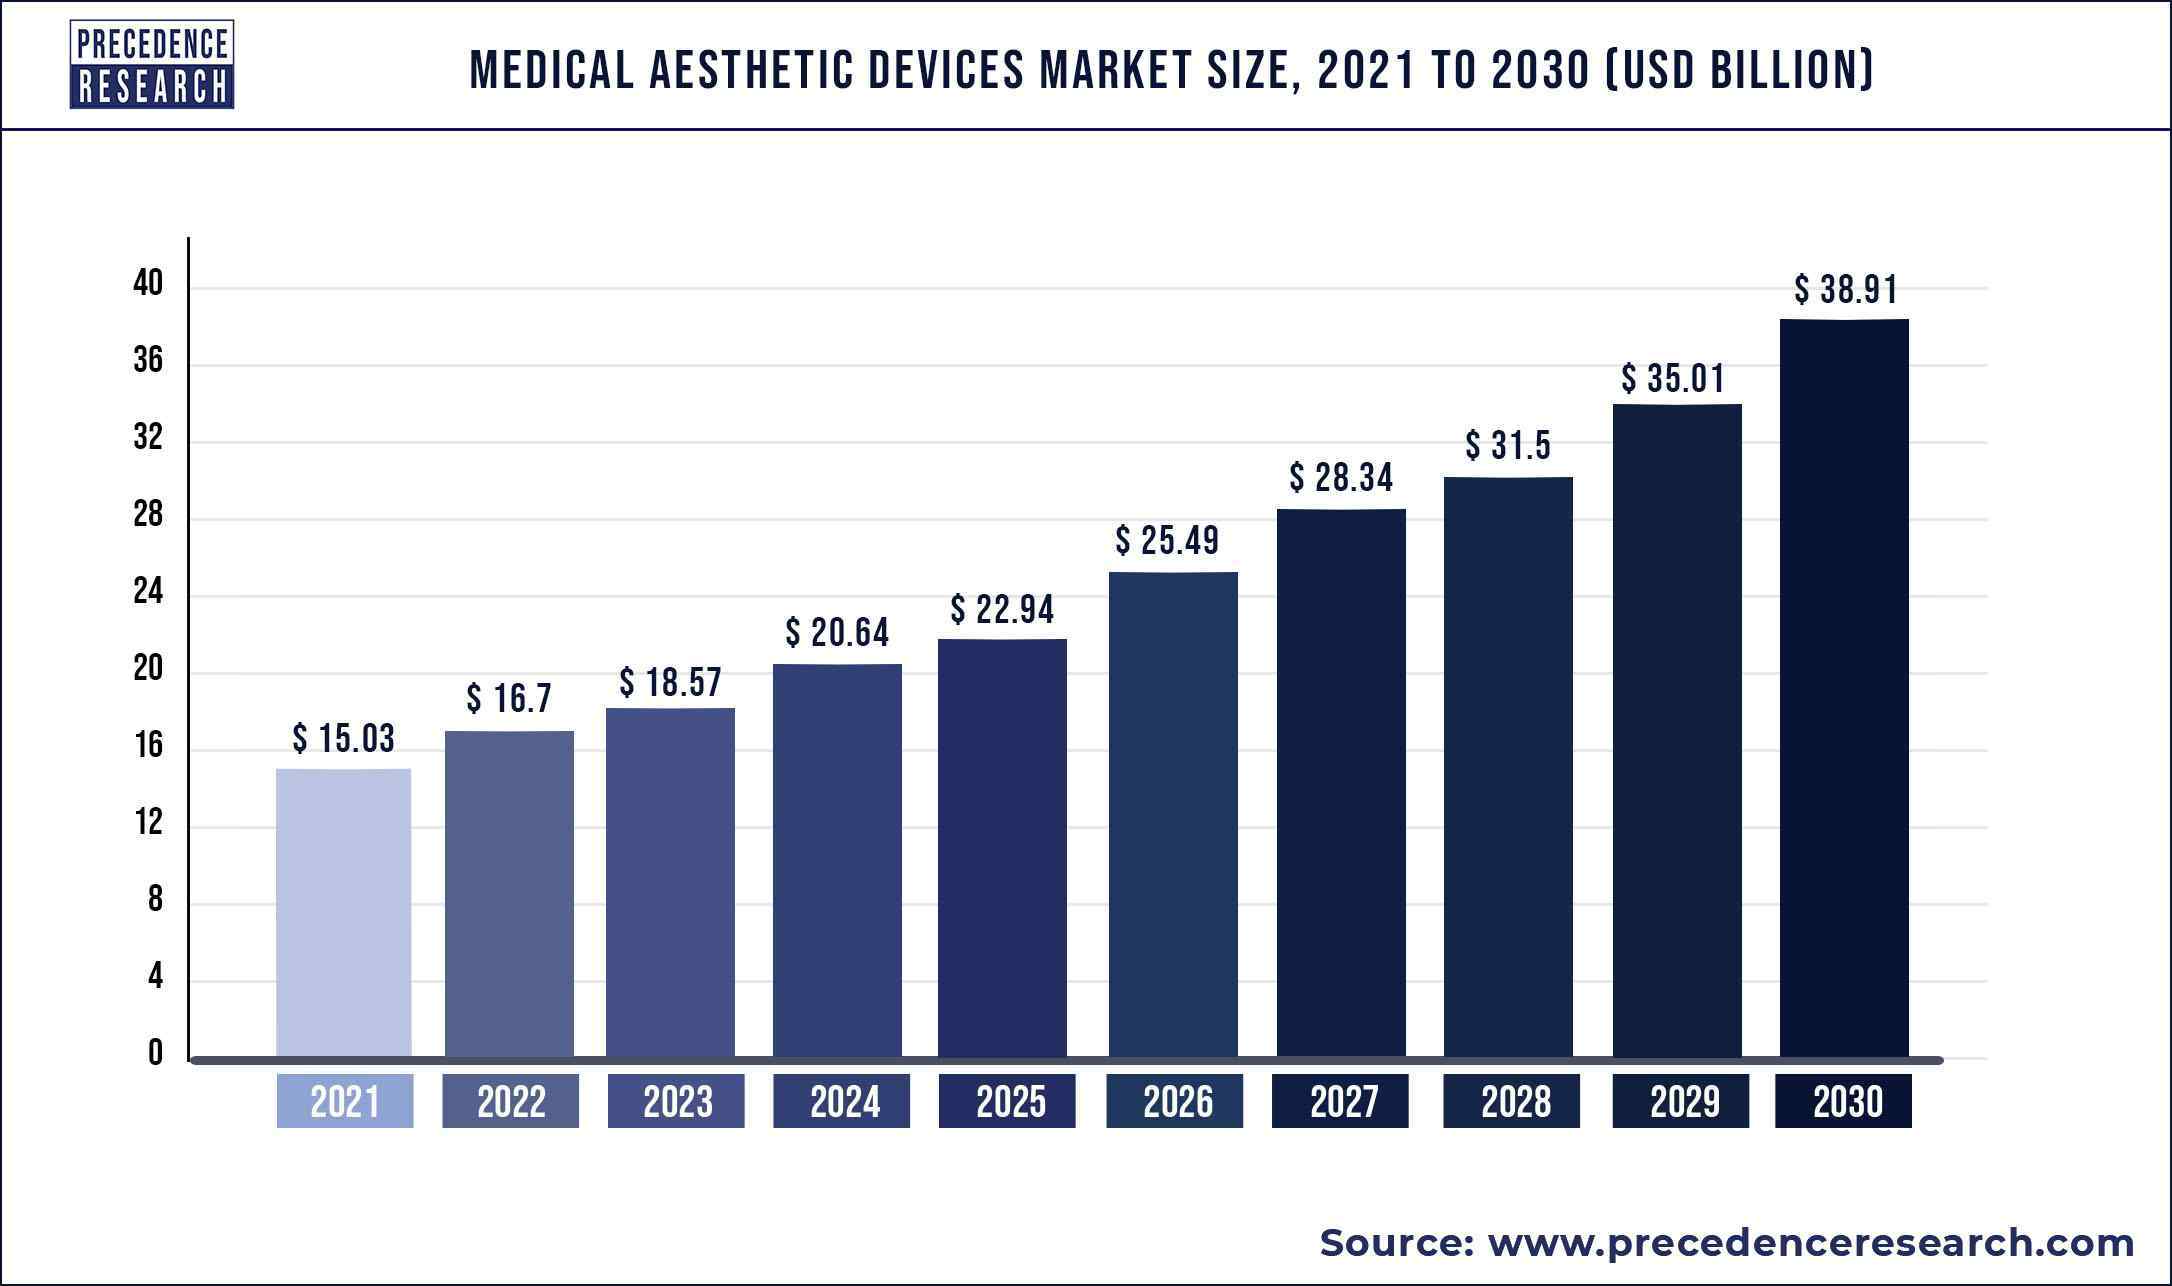 Medical Aesthetic Devices Market Size 2021 to 2030